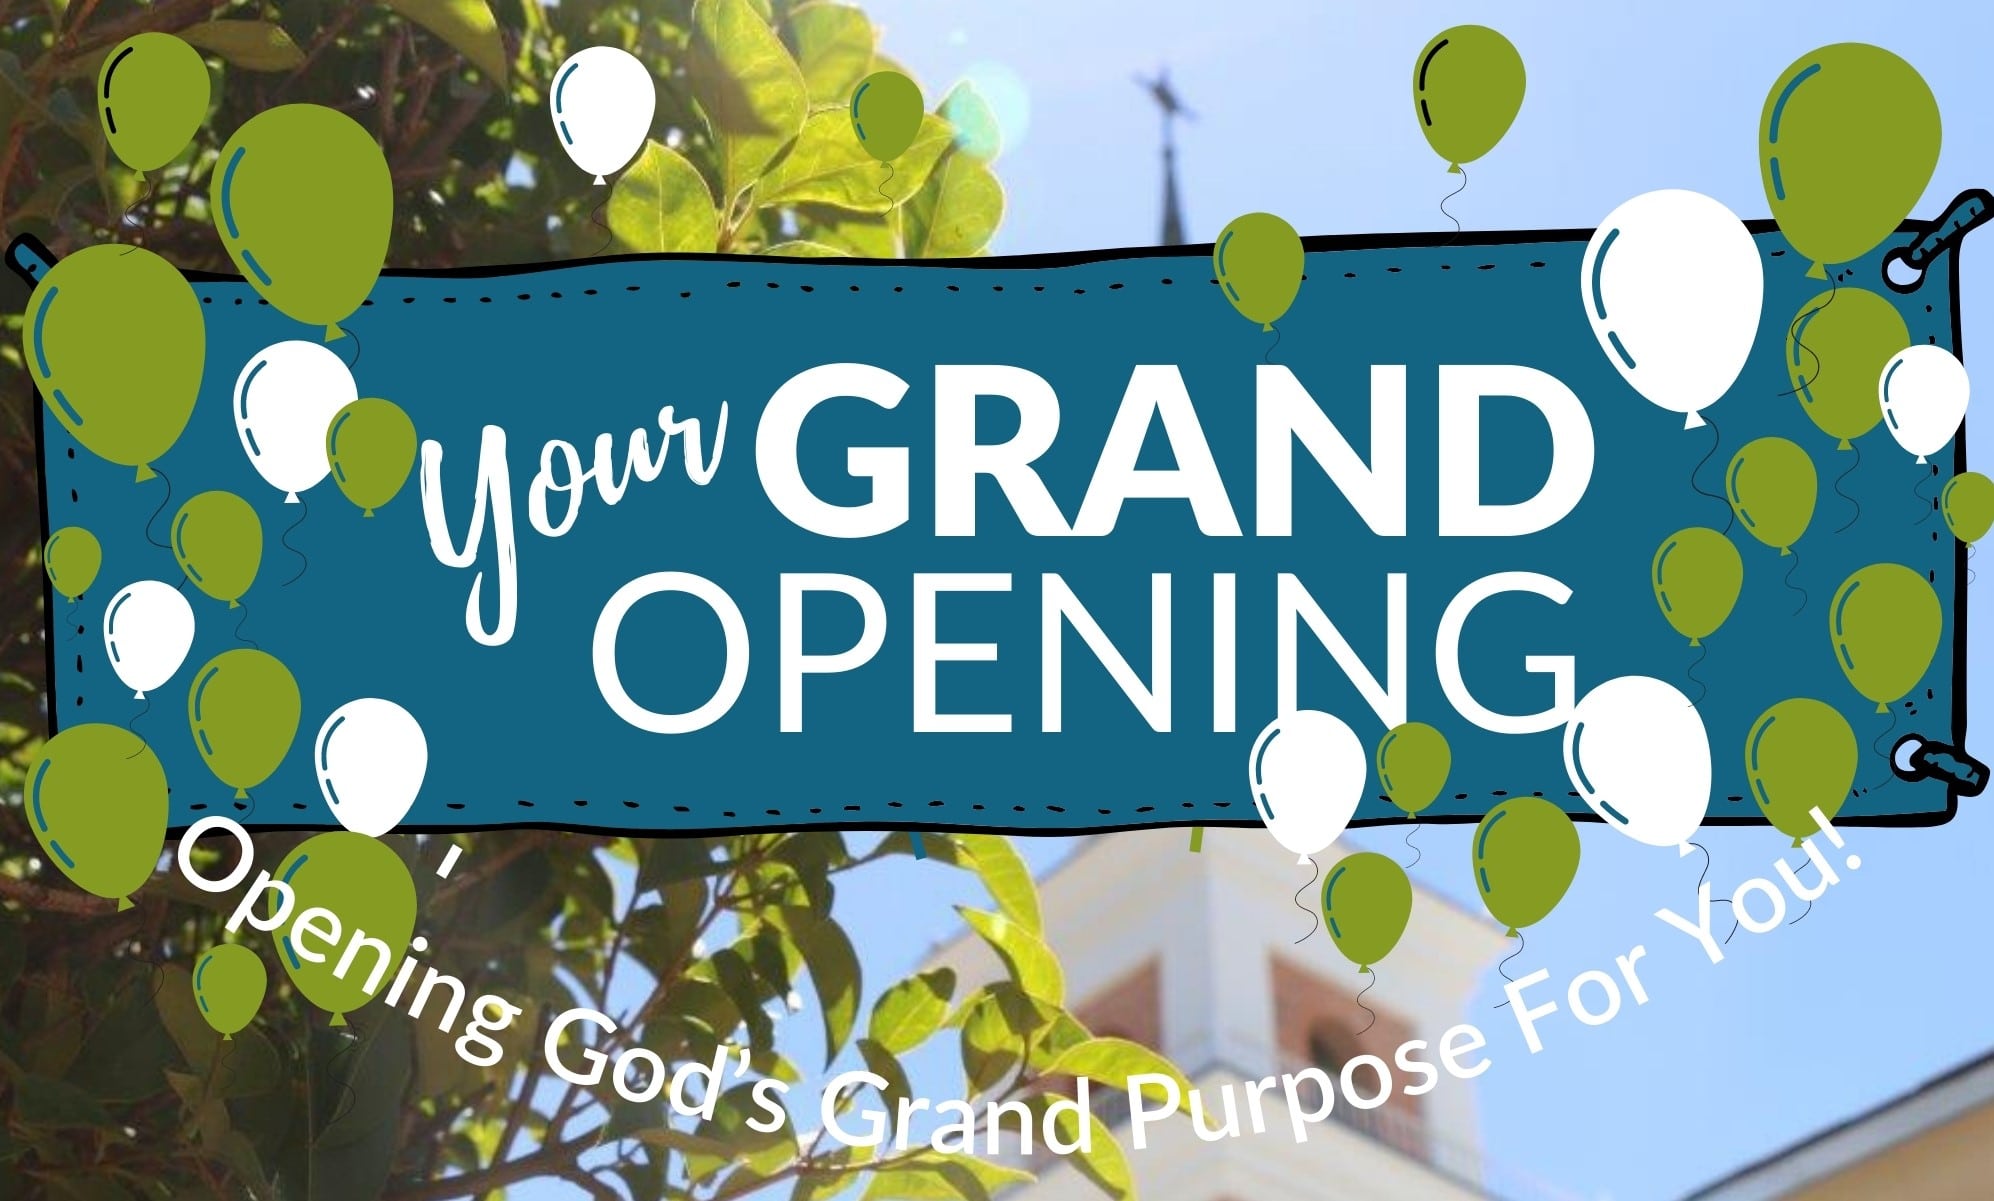 Your Grand Opening Sermon Series